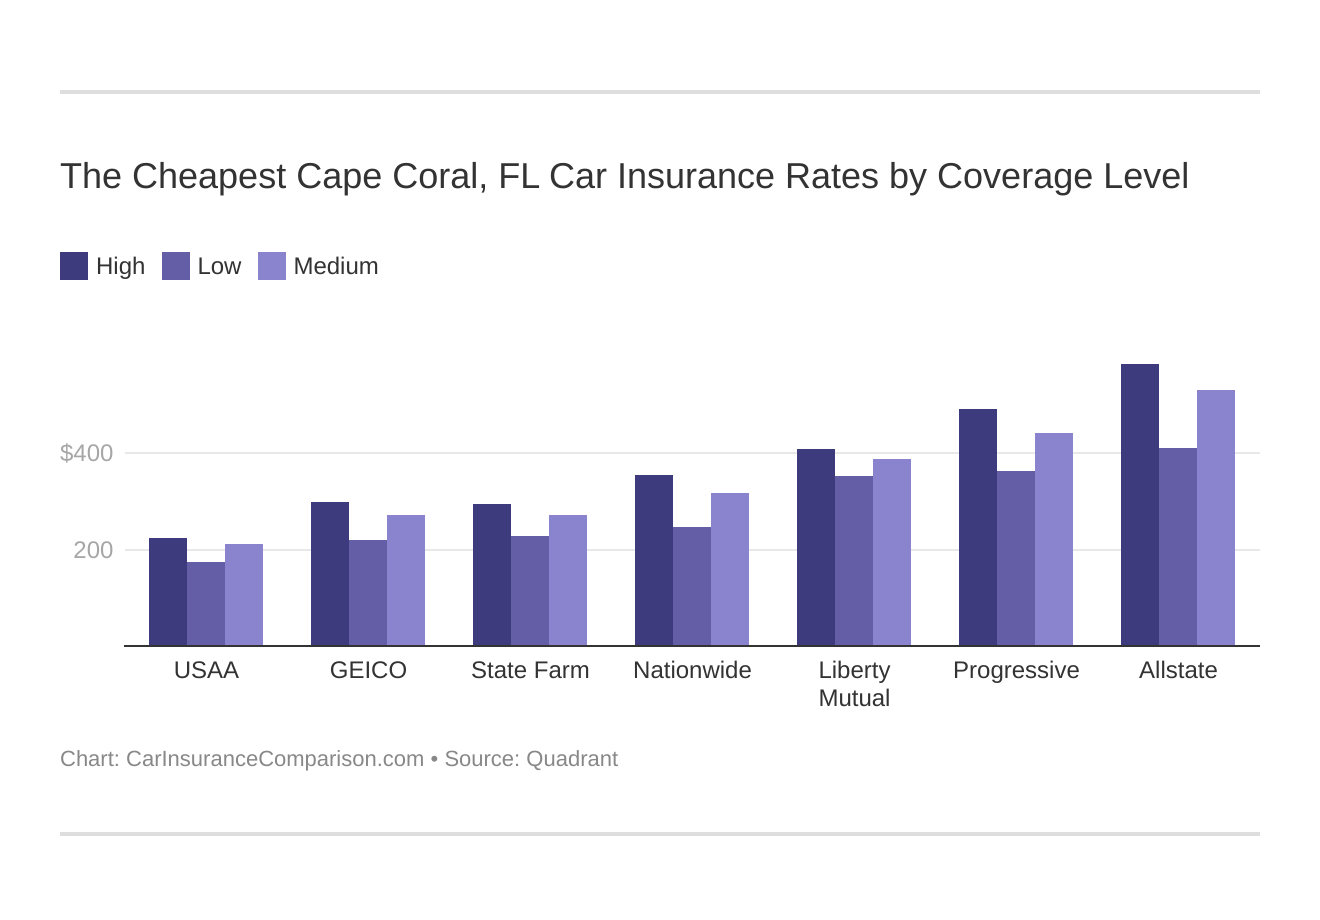 The Cheapest Cape Coral, FL Car Insurance Rates by Coverage Level